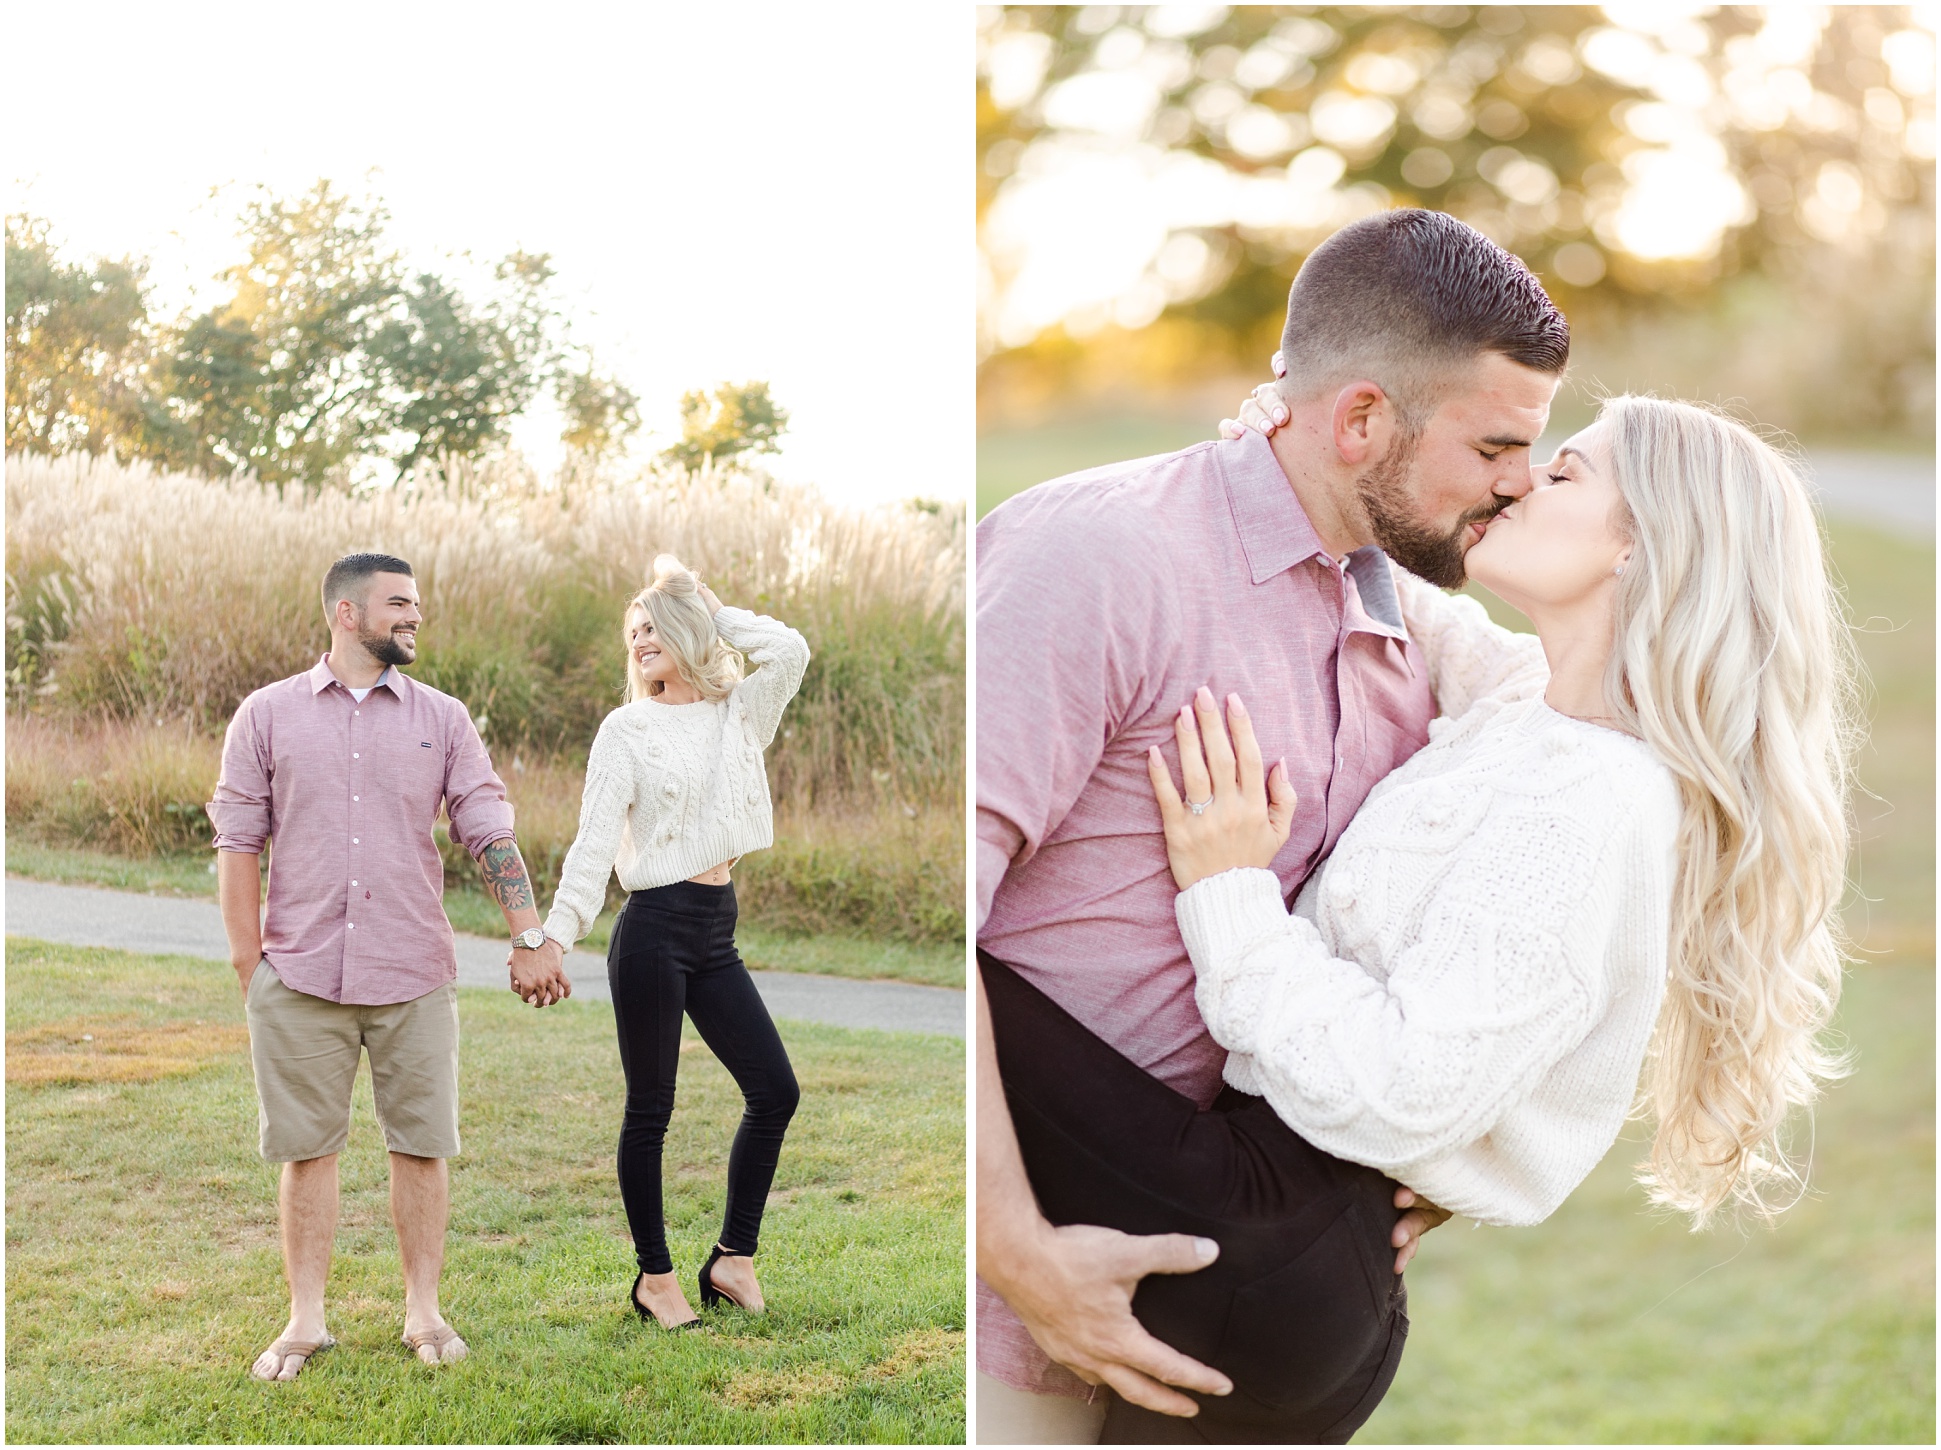 Groom wearing magenta button up shirt and khaki shorts, bride wearing blast pants heals, and a white sweater.